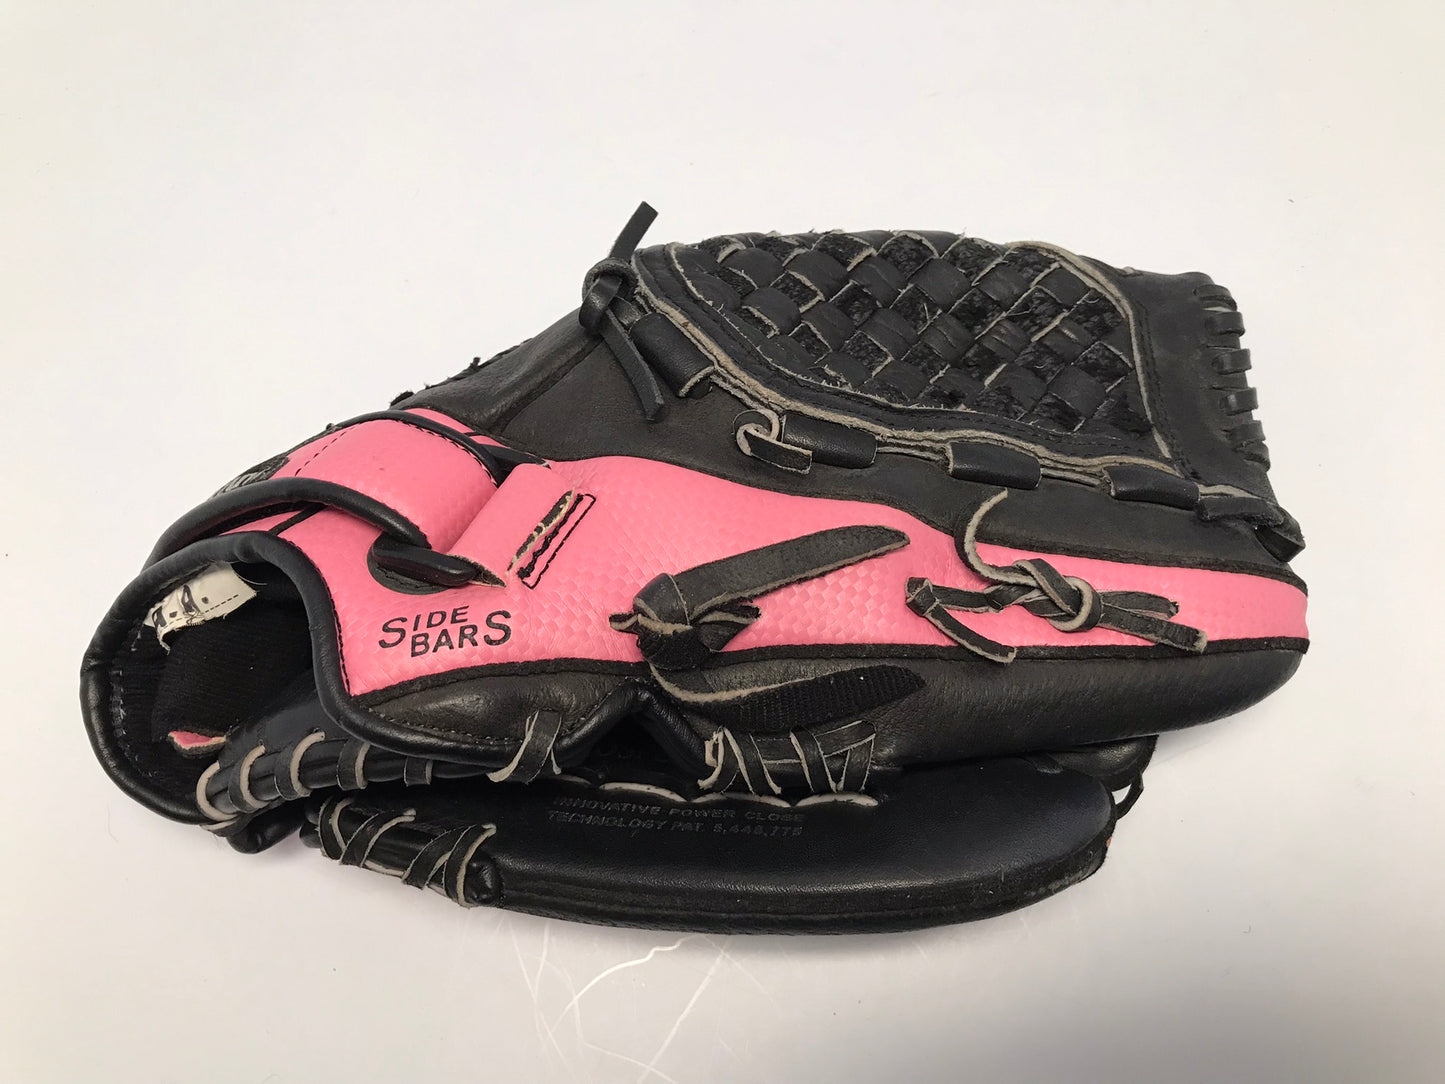 Baseball Glove Adult Size 12 inch Mizuno Black Pink Leather Fits Left Hand As New